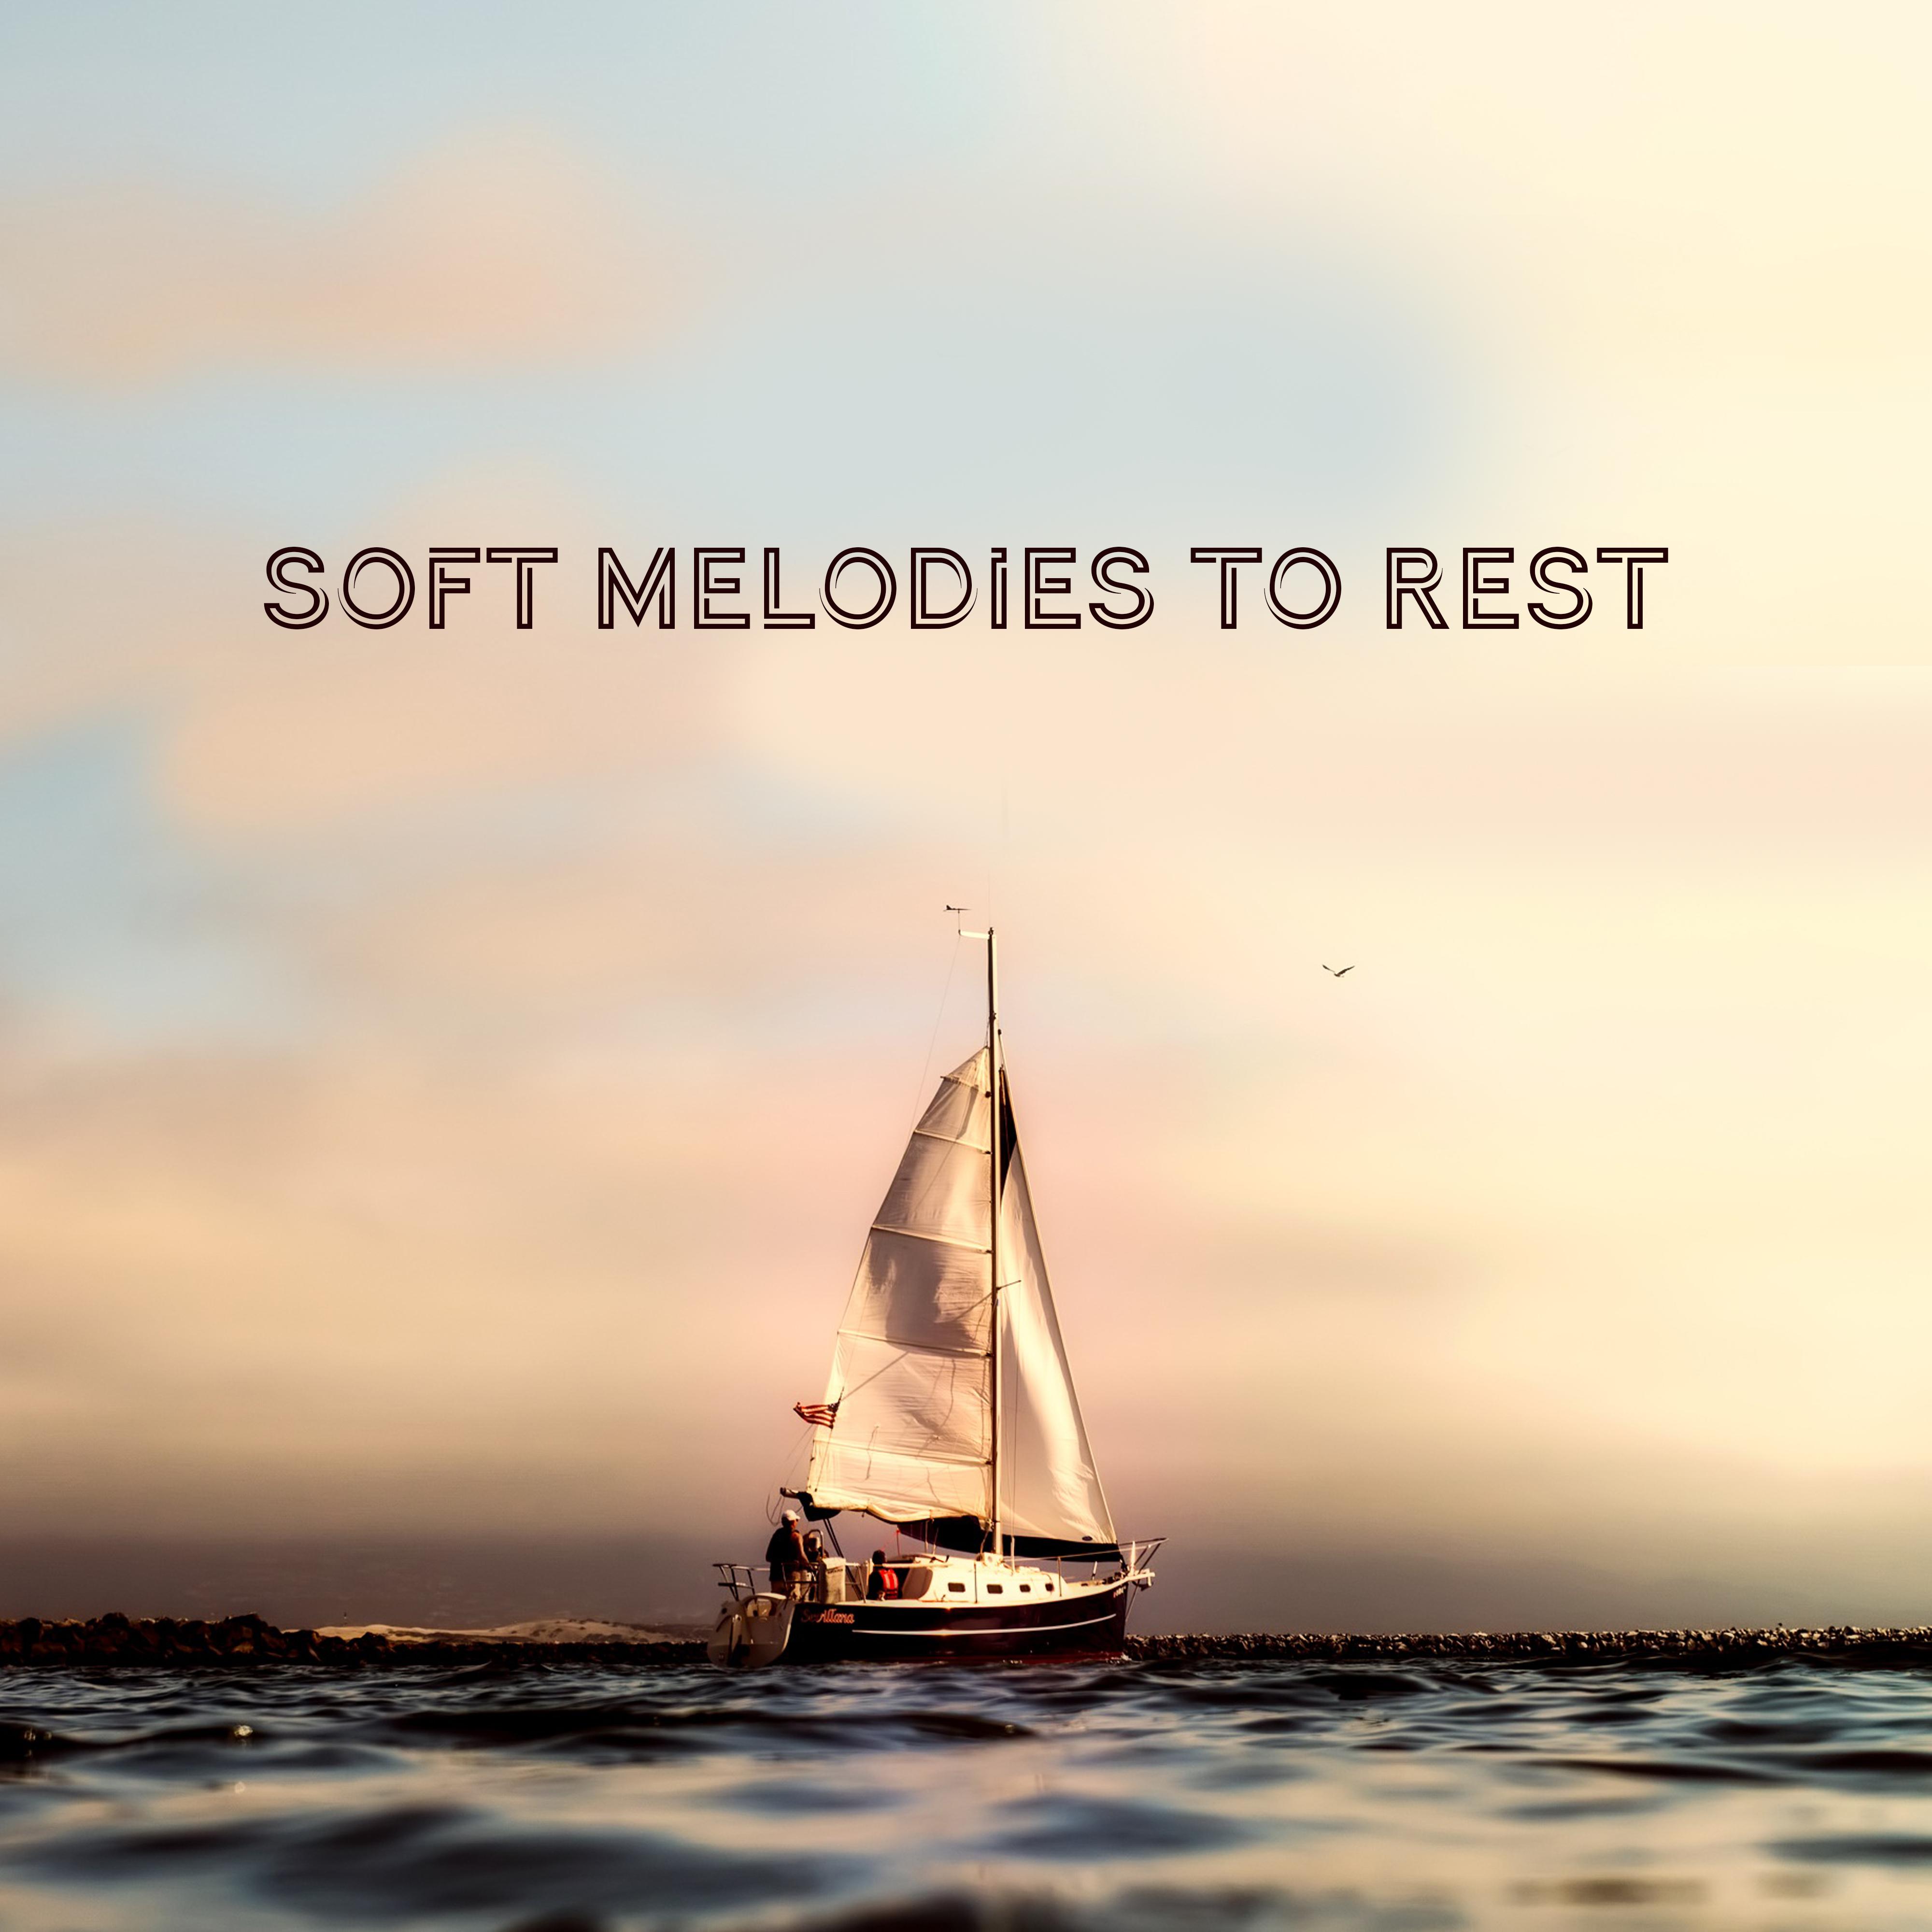 Soft Melodies to Rest